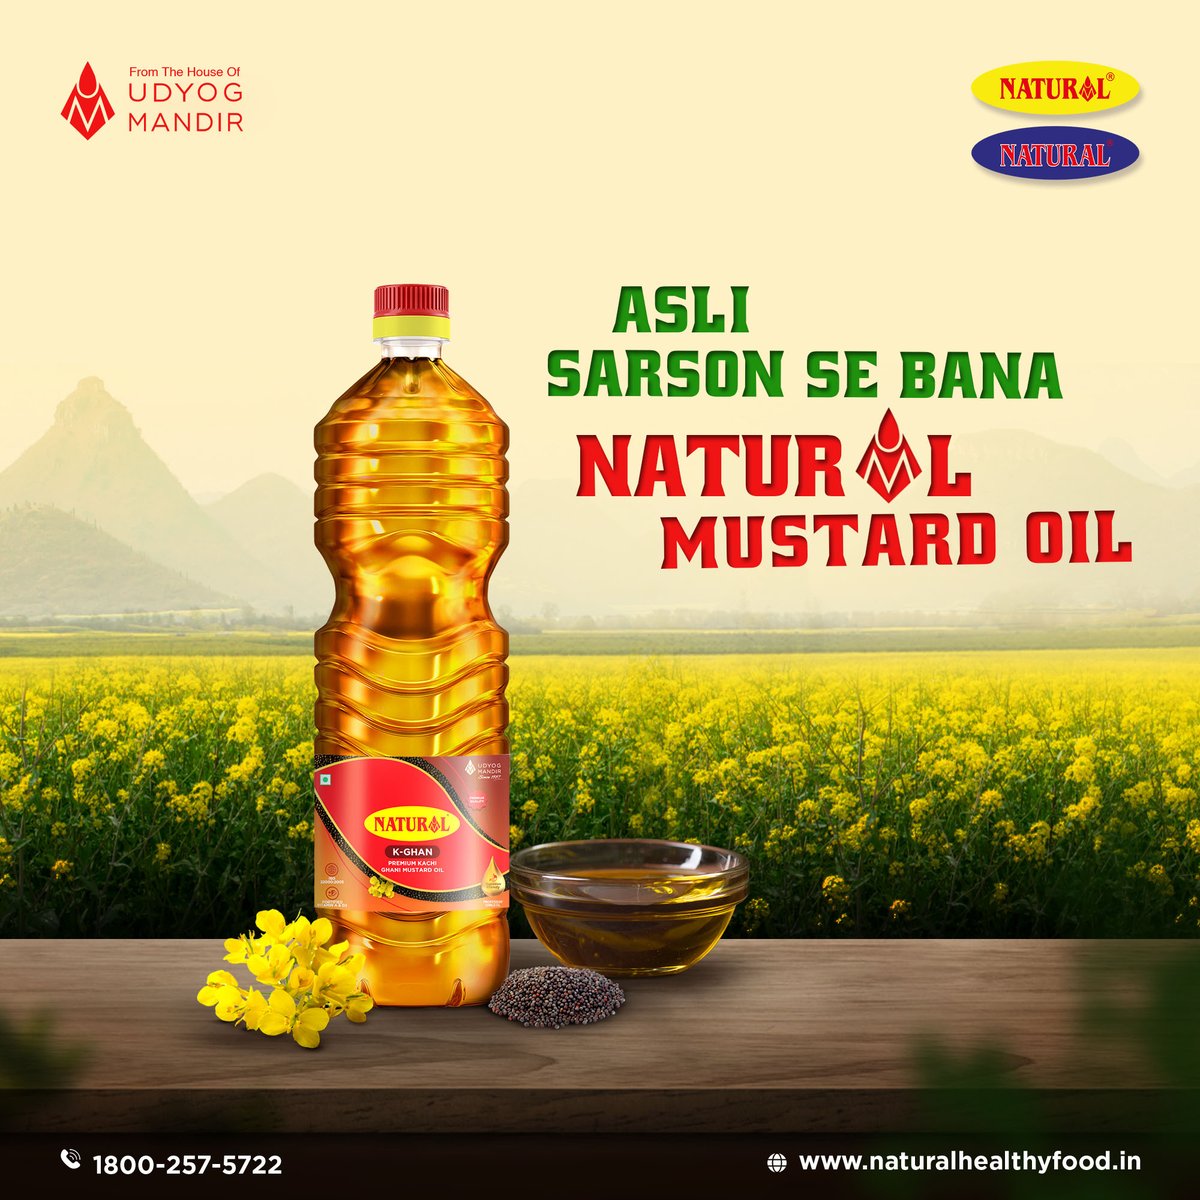 Dive into the pure essence of sarson seeds with Natural Oil! Elevate your culinary experience with the goodness of nature. 🌿✨ Order today on Amazon for a touch of magic in every dish. 🛒 

#NaturalOil #HealthyChoice #CookingEssentials #MustardOilMagic #mustardoil